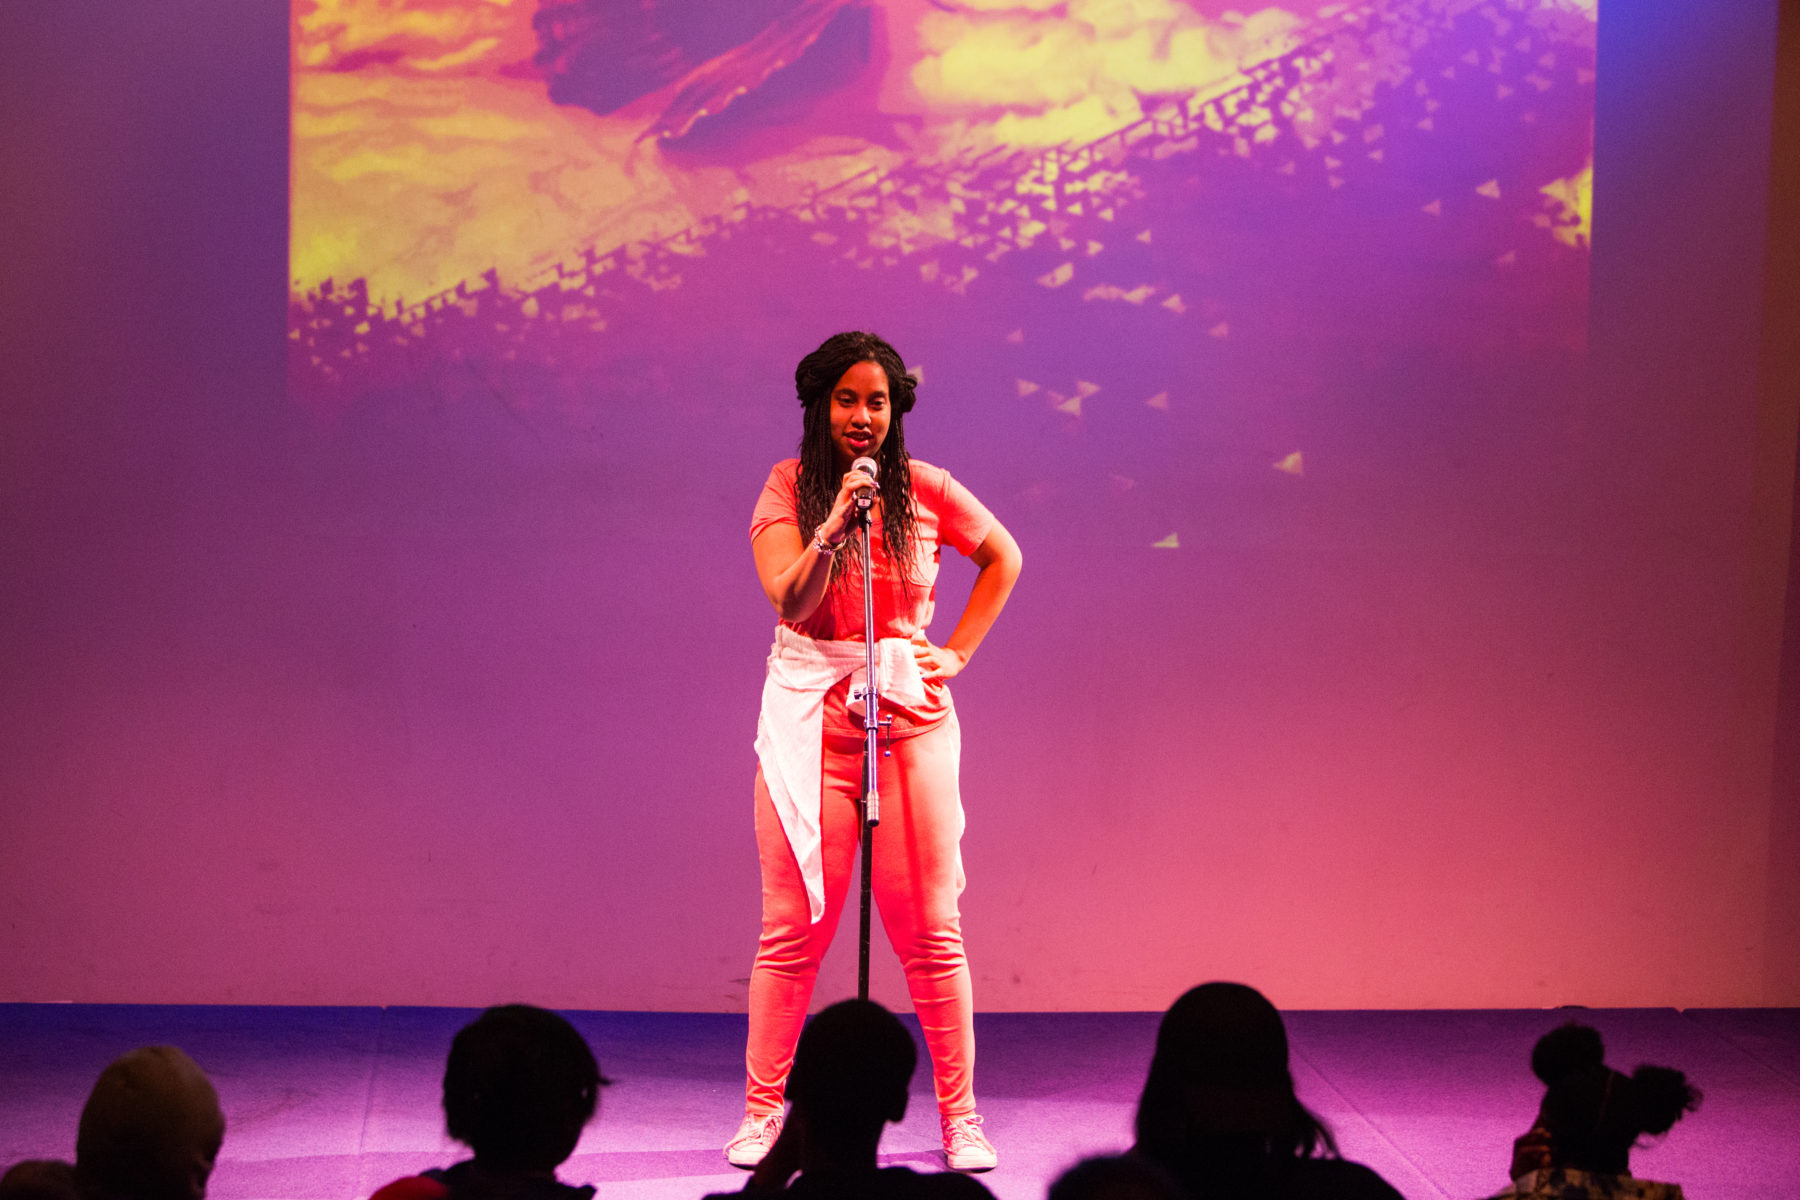 A female African American student holds a microphone stand in one hand and places her other on her hip as she performs against a background illuminated with pink and purple light.